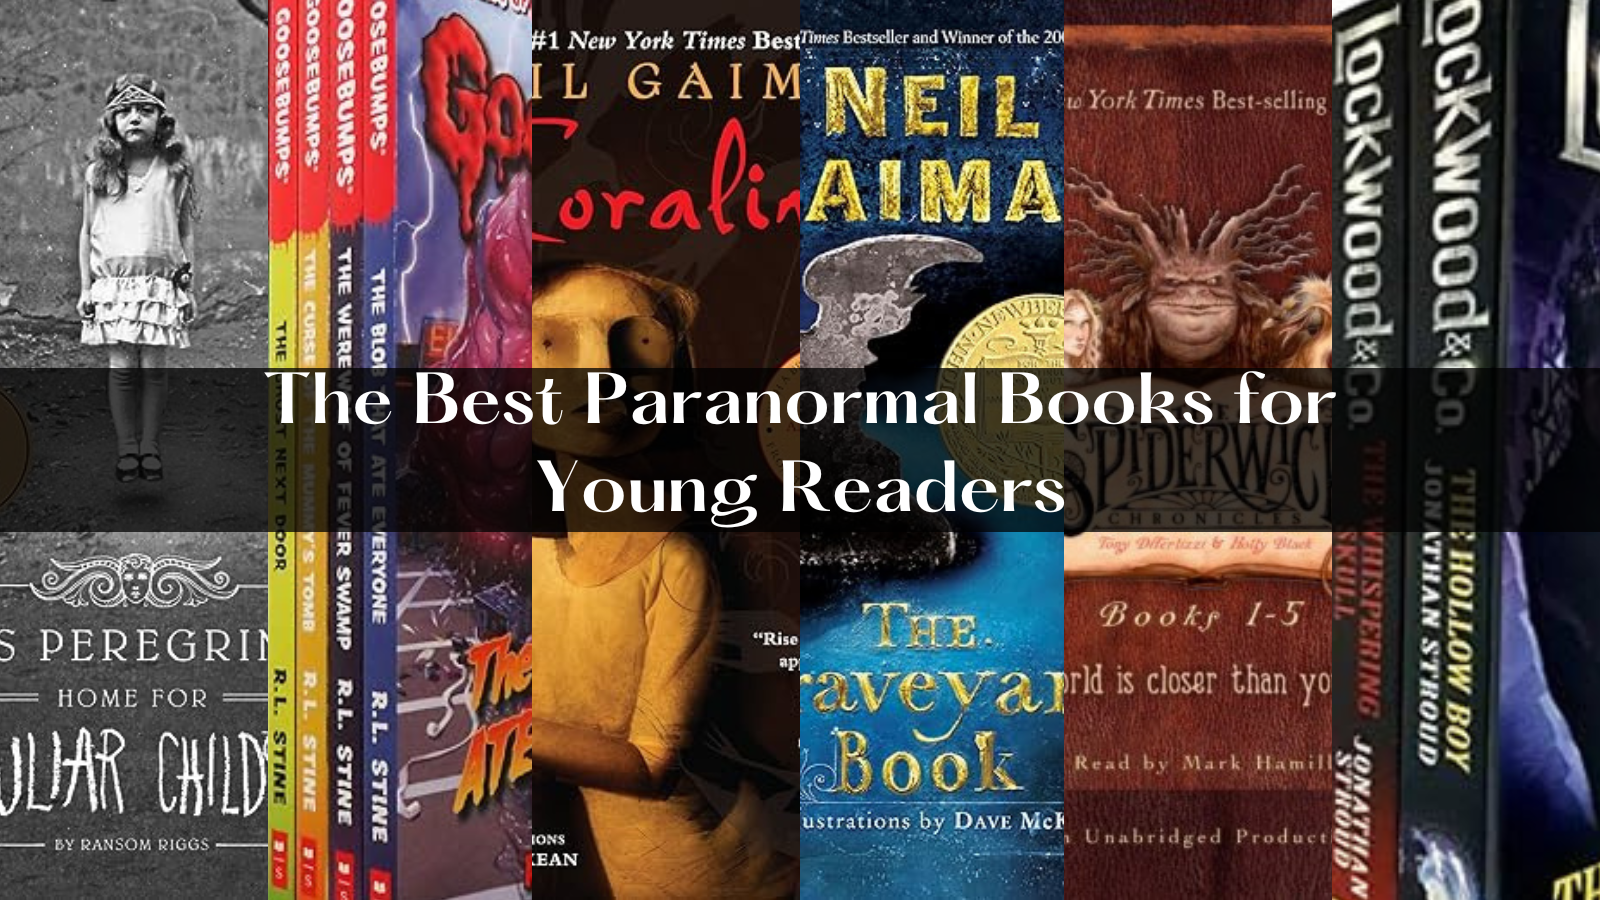 The Best Paranormal Books for Young Readers